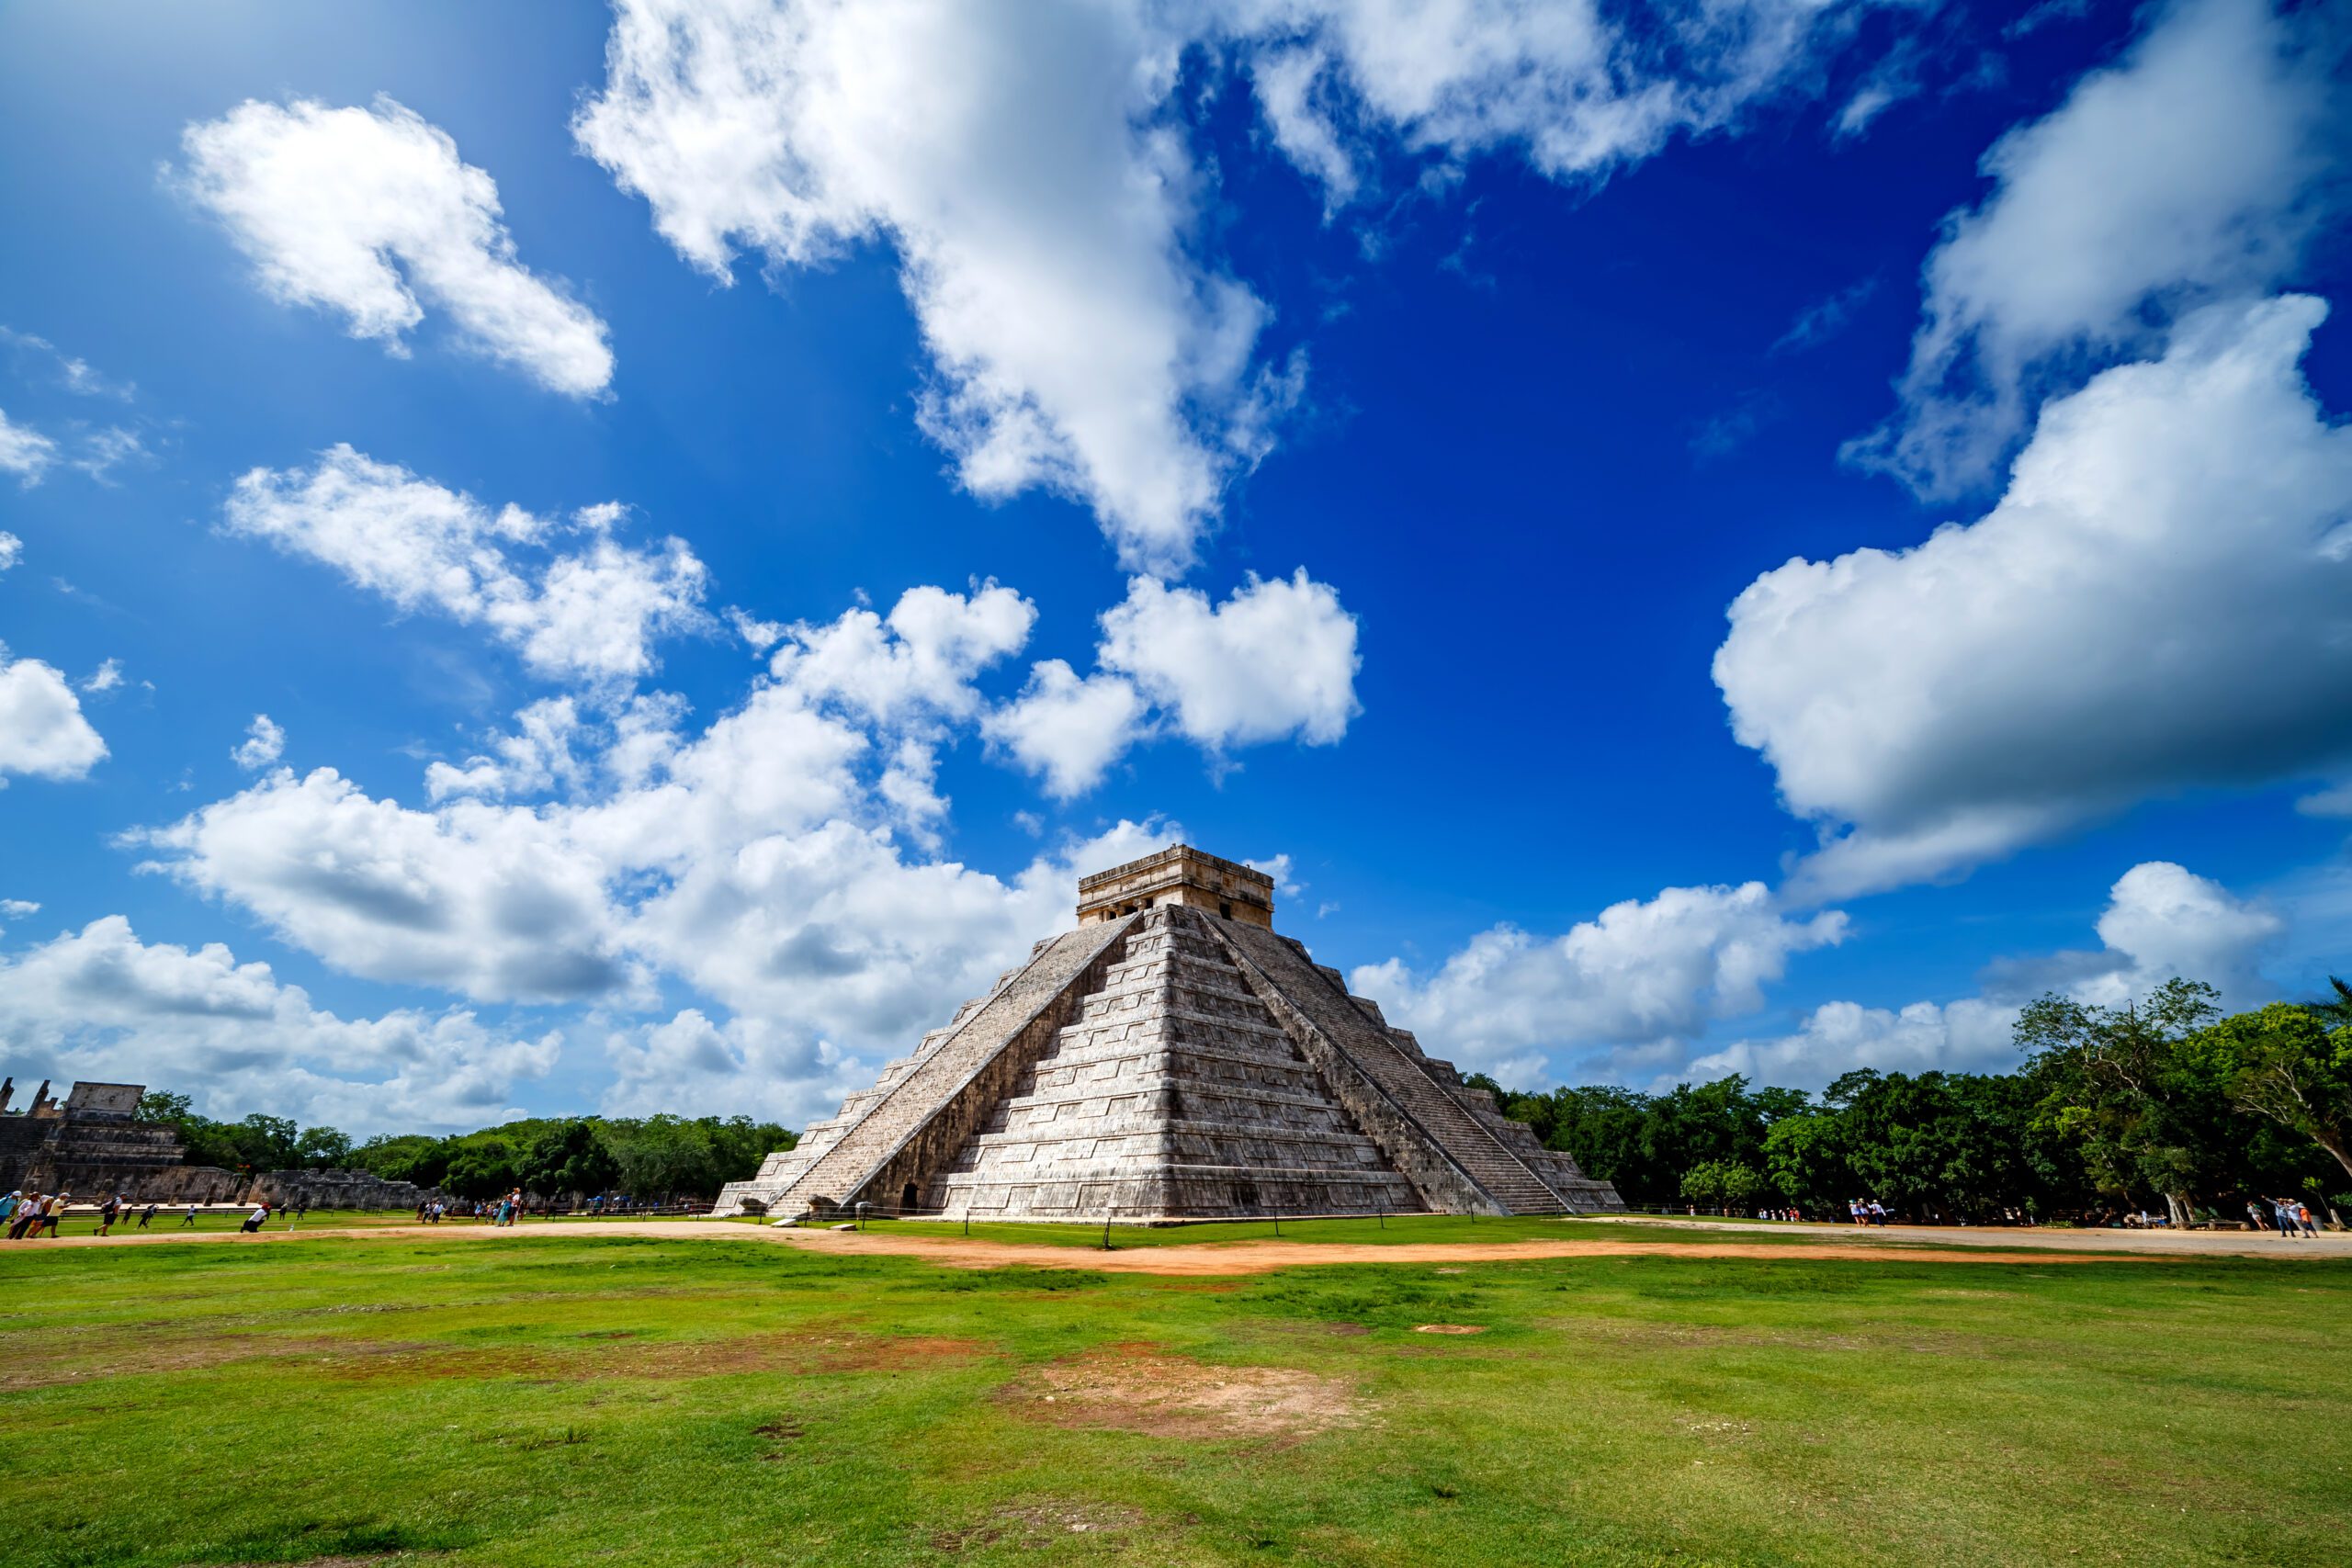 Breathtaking view of the pyramid in the archaeological site of Chichen Itza in Yucatan, Mexico